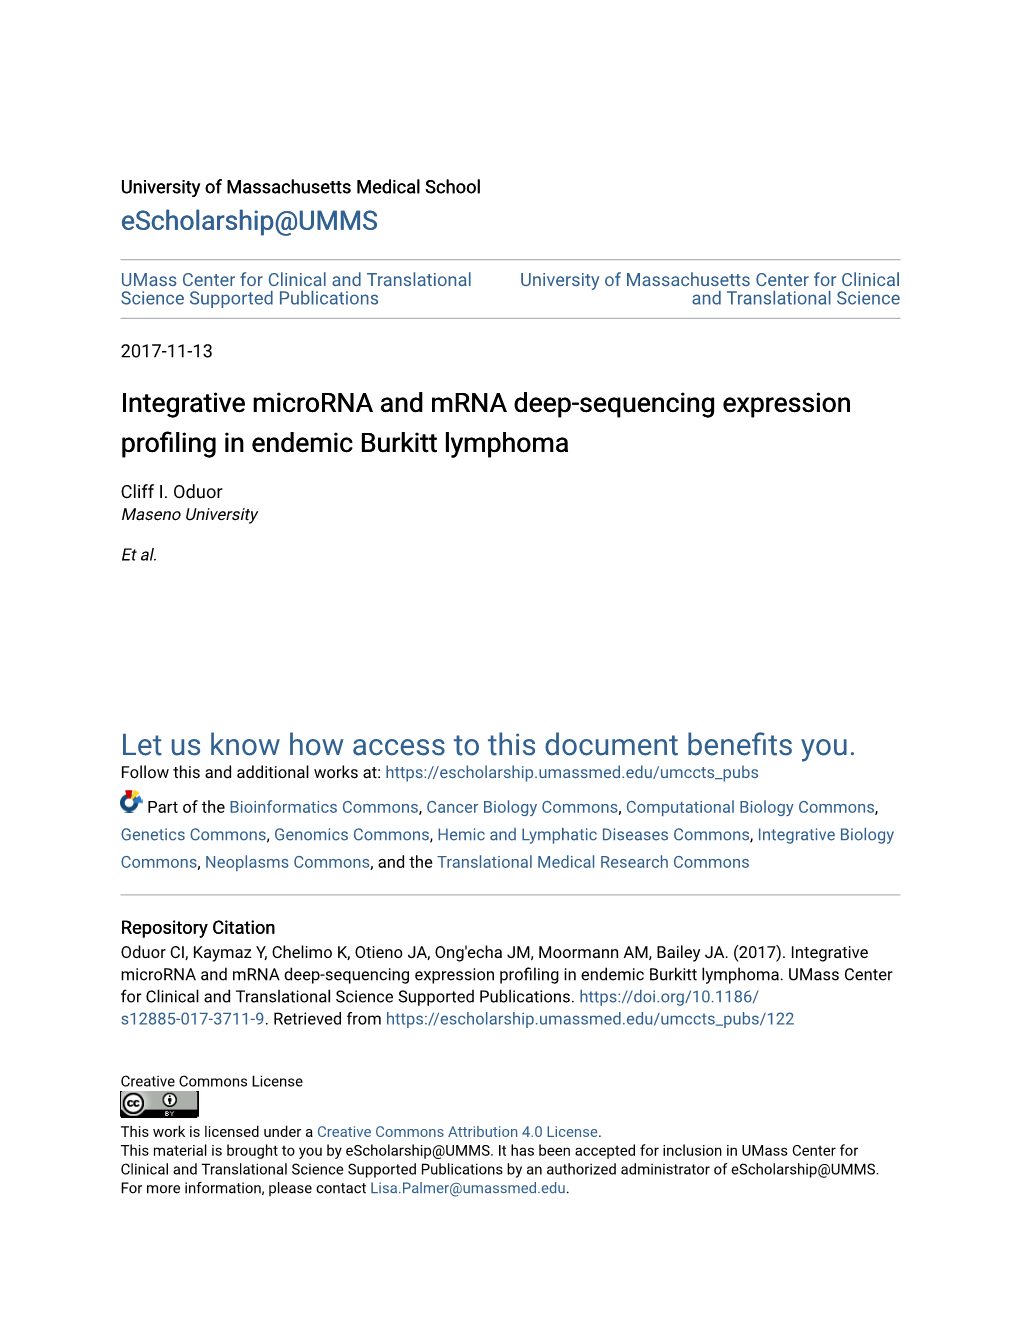 Integrative Microrna and Mrna Deep-Sequencing Expression Profiling in Endemic Burkitt Lymphoma